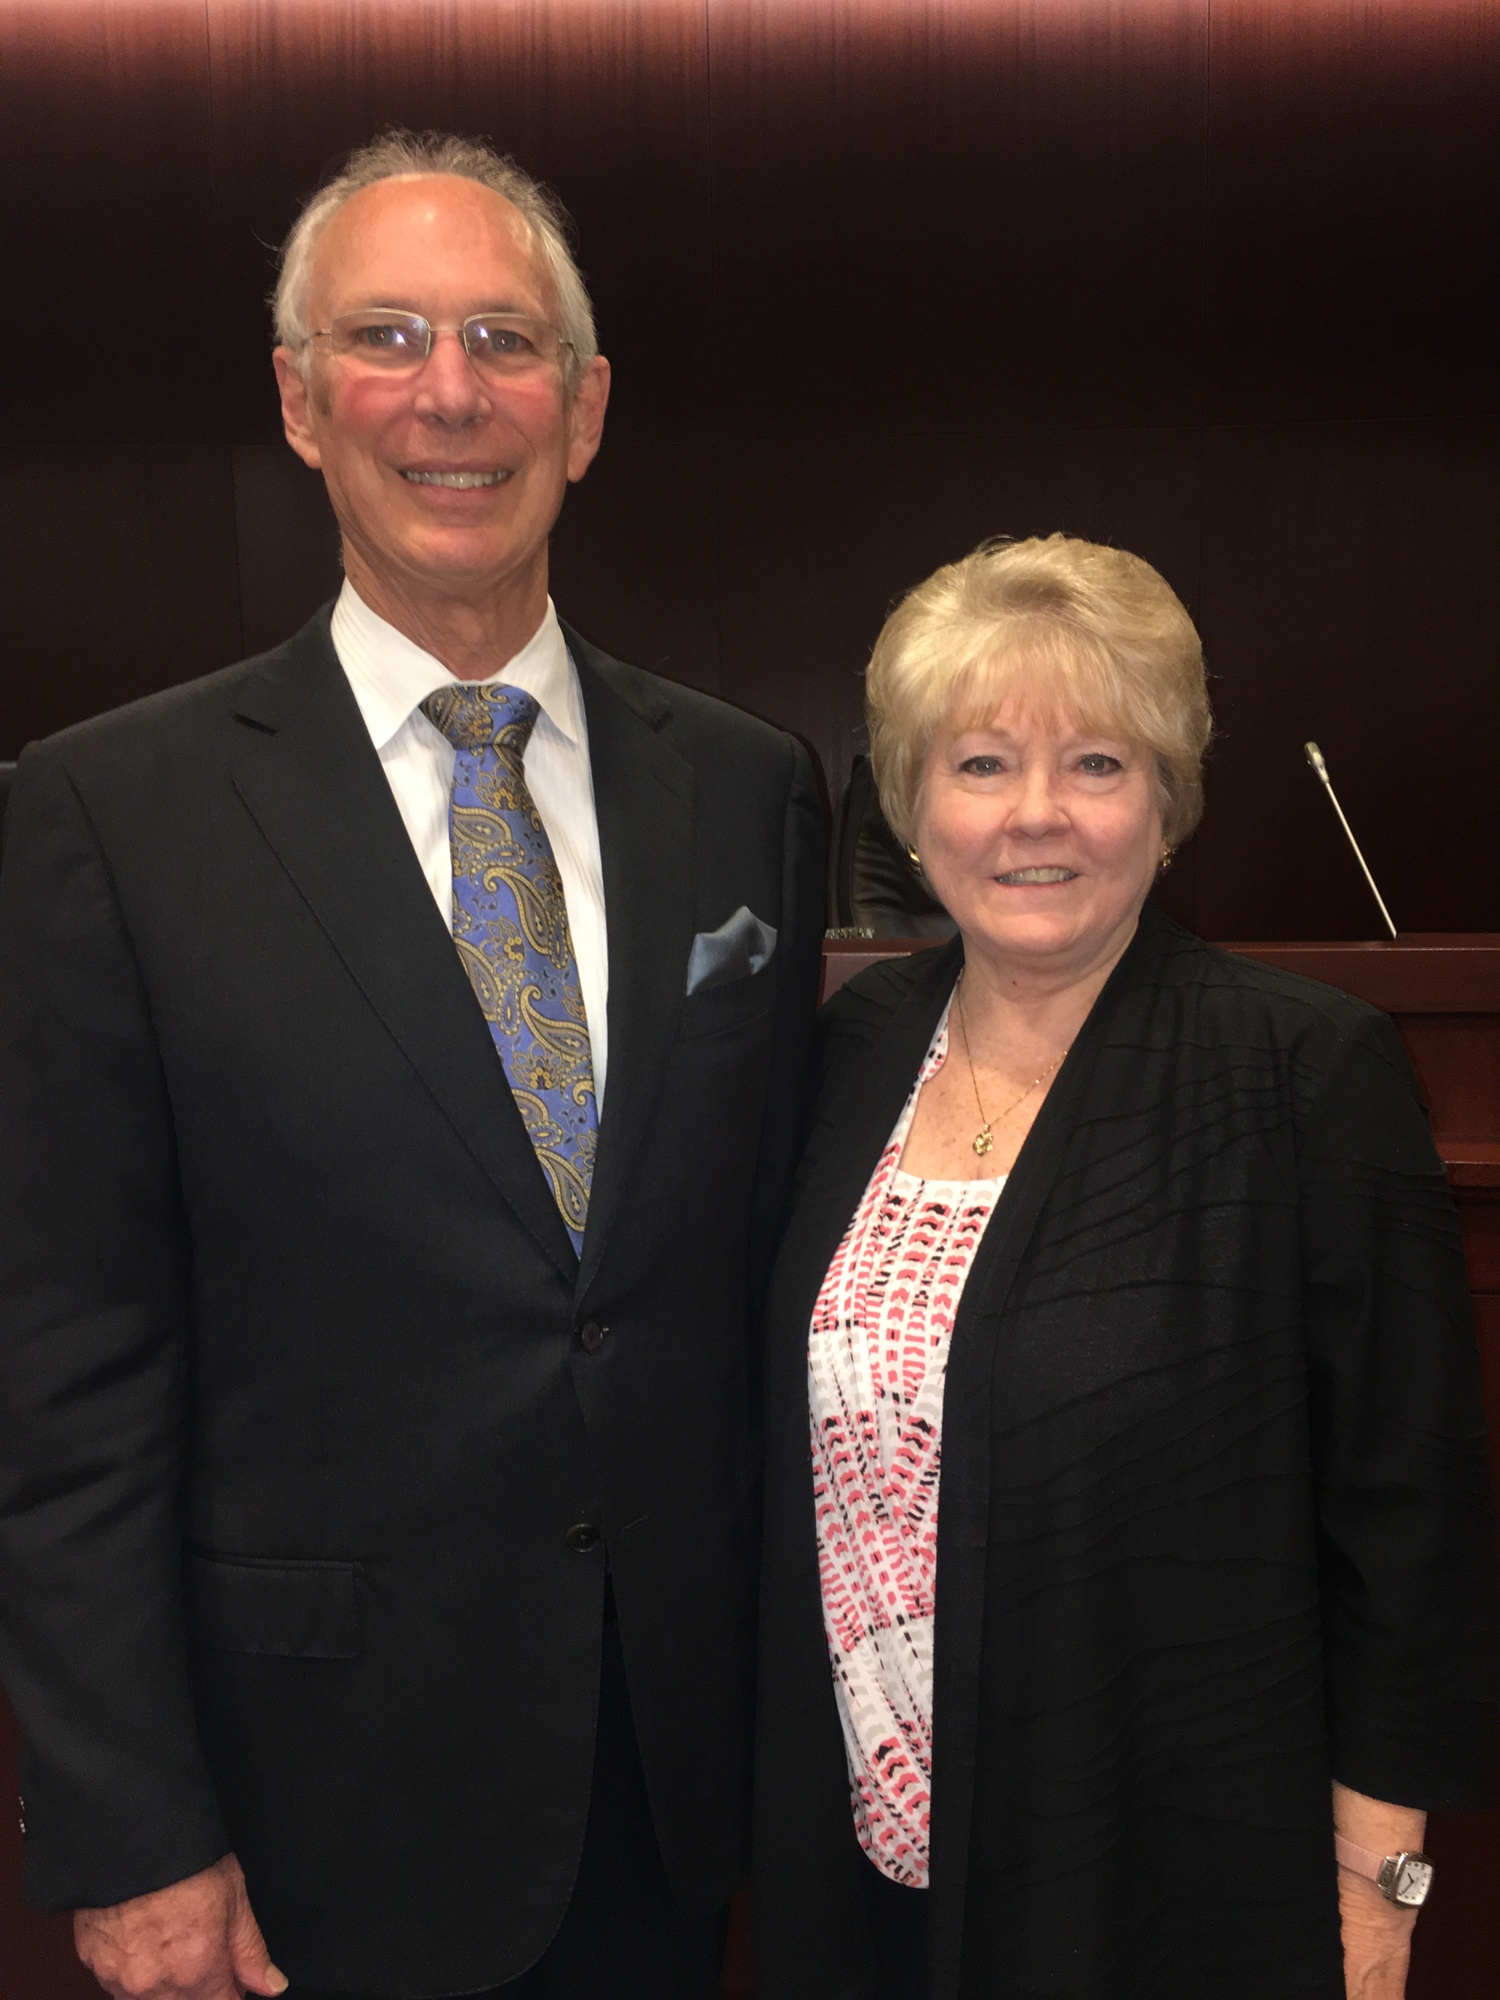 Winter Garden Mayor John Rees and Kathy Golden at the Jan. 25 city commission meeting. Golden served as the City Clerk for 18 years. 